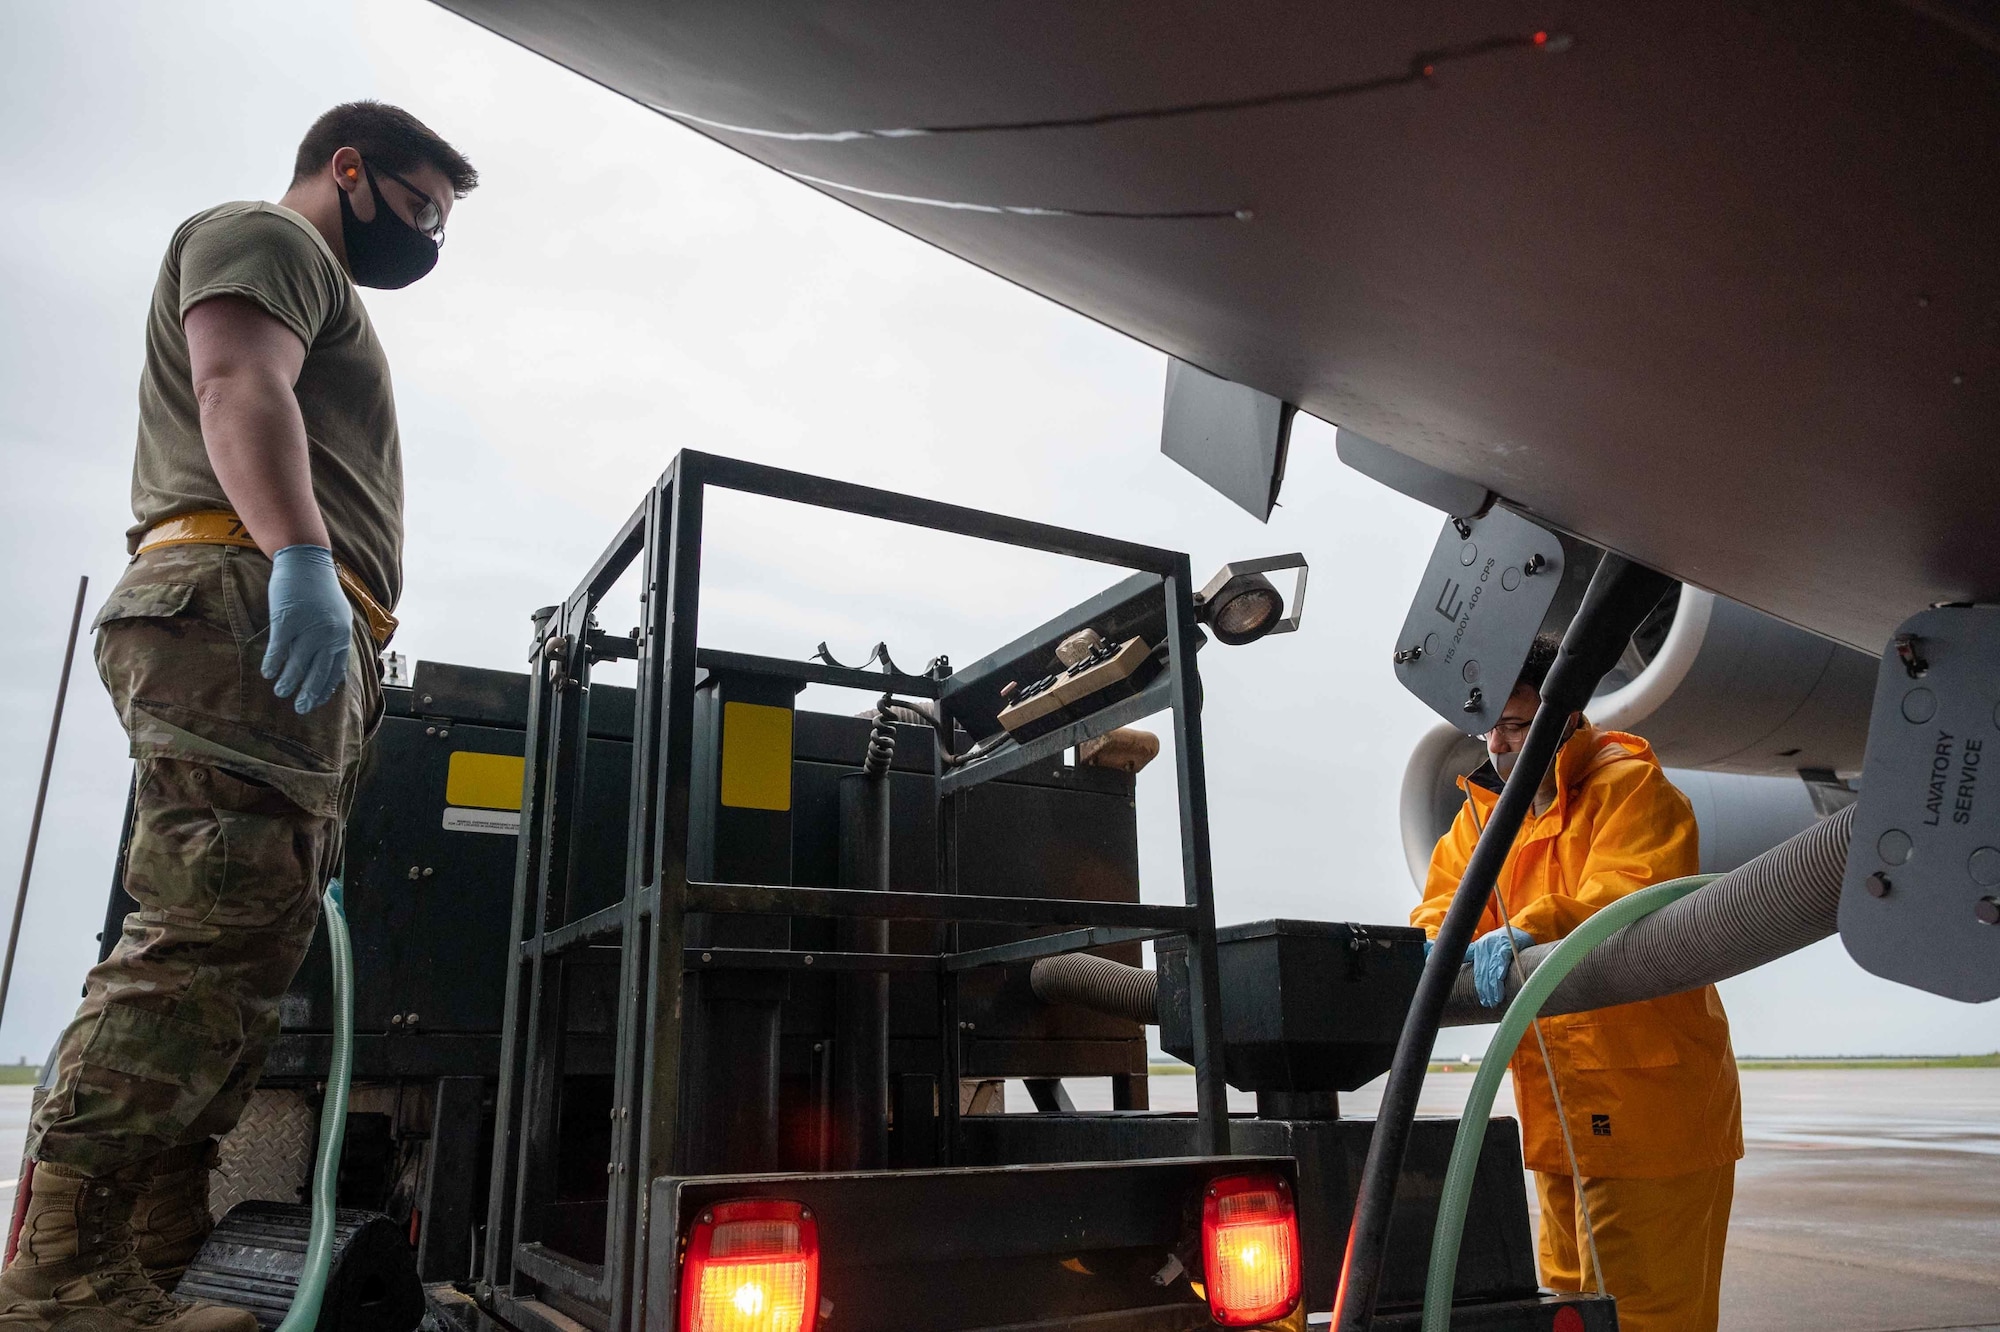 Airman 1st Class Aaron Travers, 728th Air Mobility Squadron aircraft services journeyman, assists Senior Airman Angel Peralta, 496th Air Base Squadron air transportation function specialist, in servicing a C-17 Globemaster III at Morón Air Base, Spain, April 5, 2022.